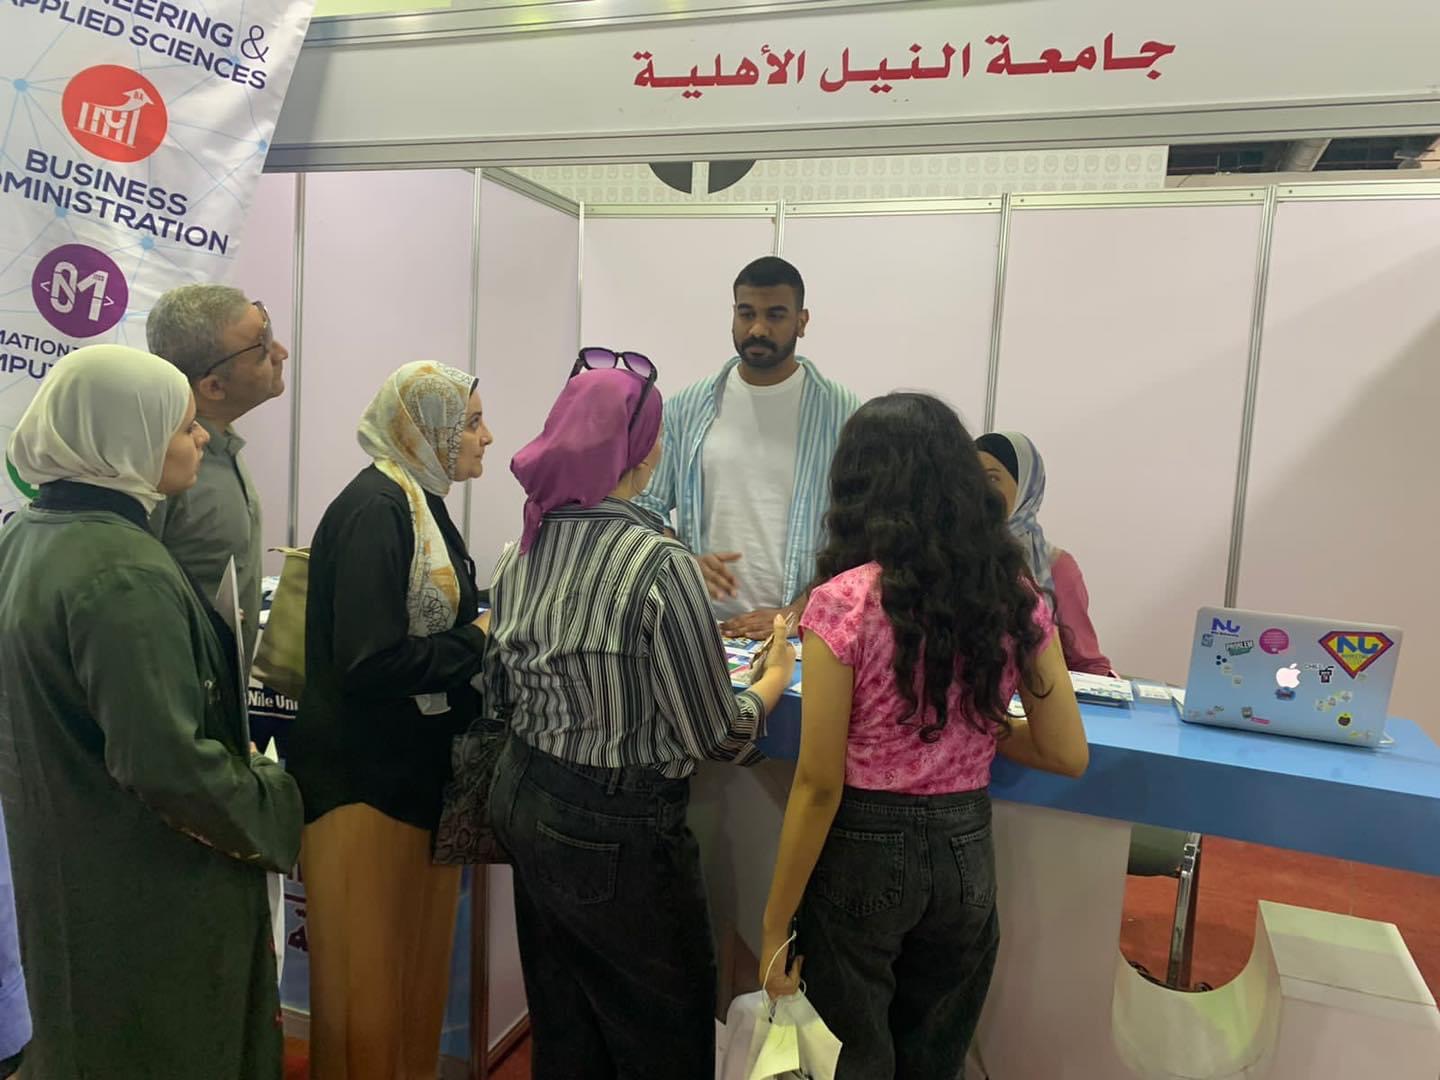 Nile University participated in the Higher Education University Fair 